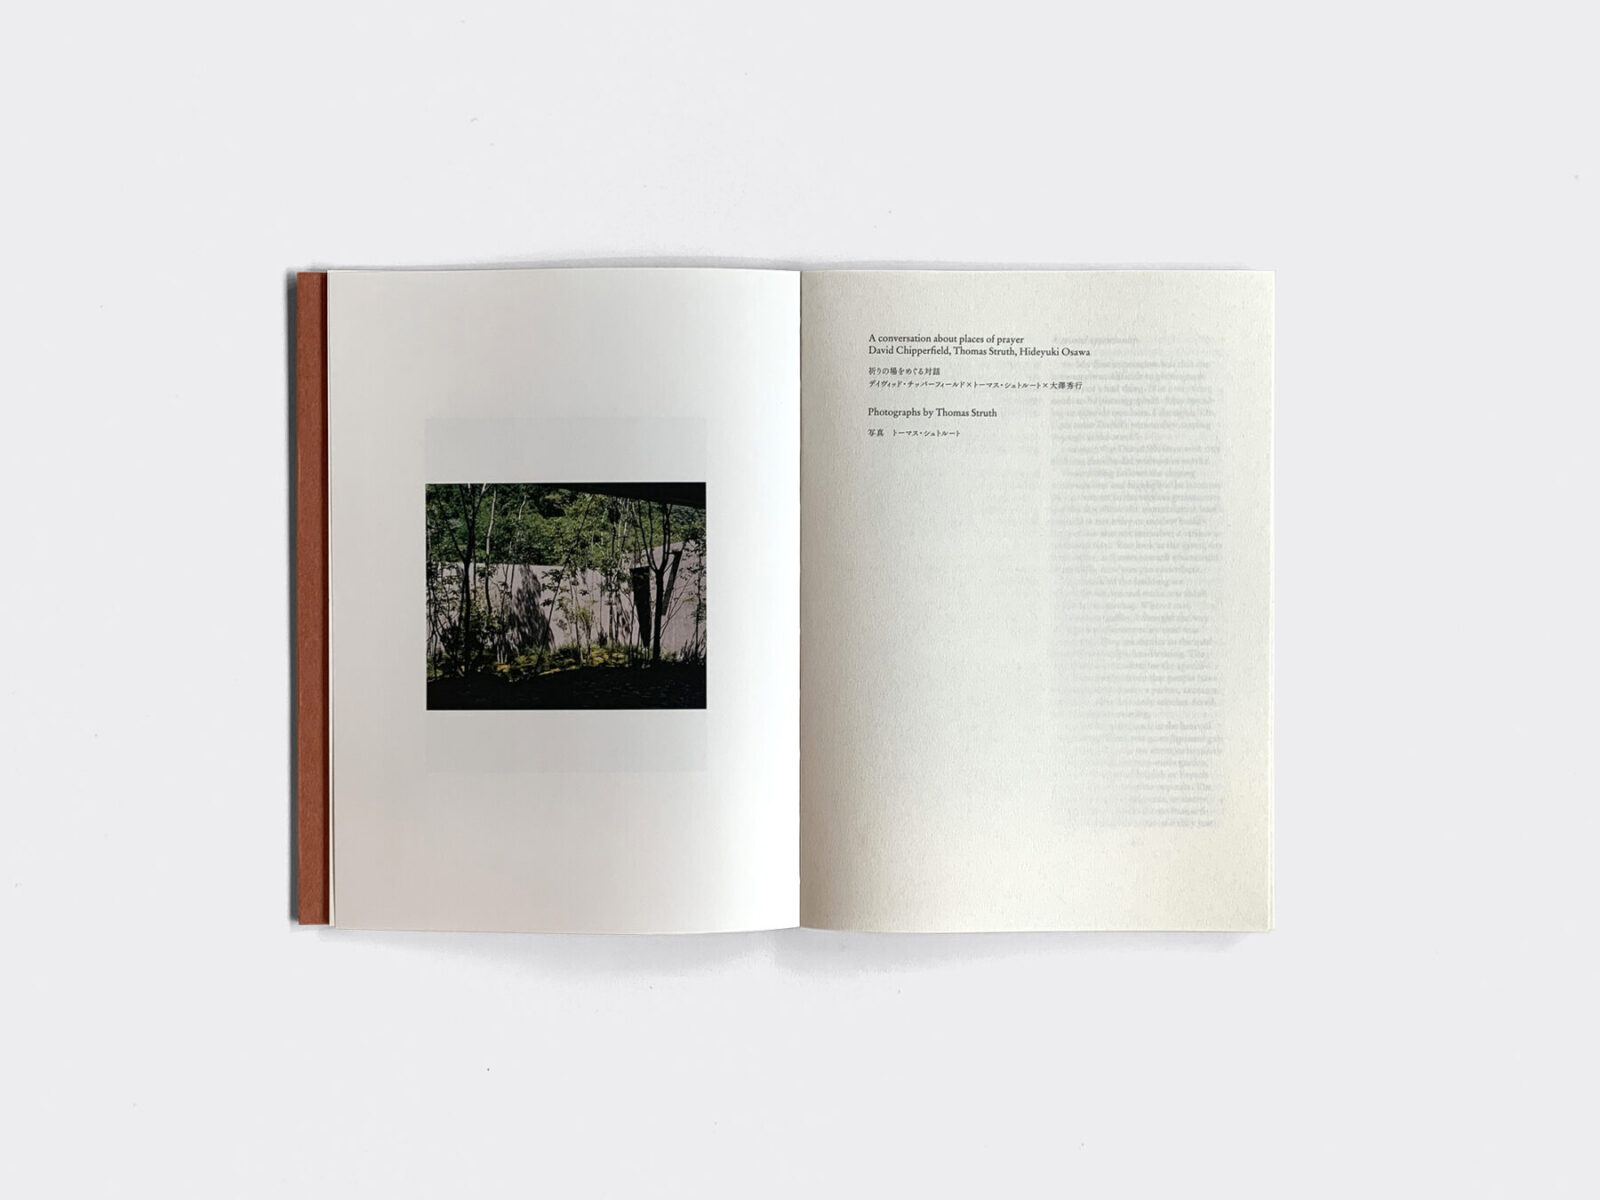 Archisearch Inagawa Cemetery Chapel and Visitor Centre: a new book published on David Chipperfield Architects’ Inagawa Chapel project in Japan